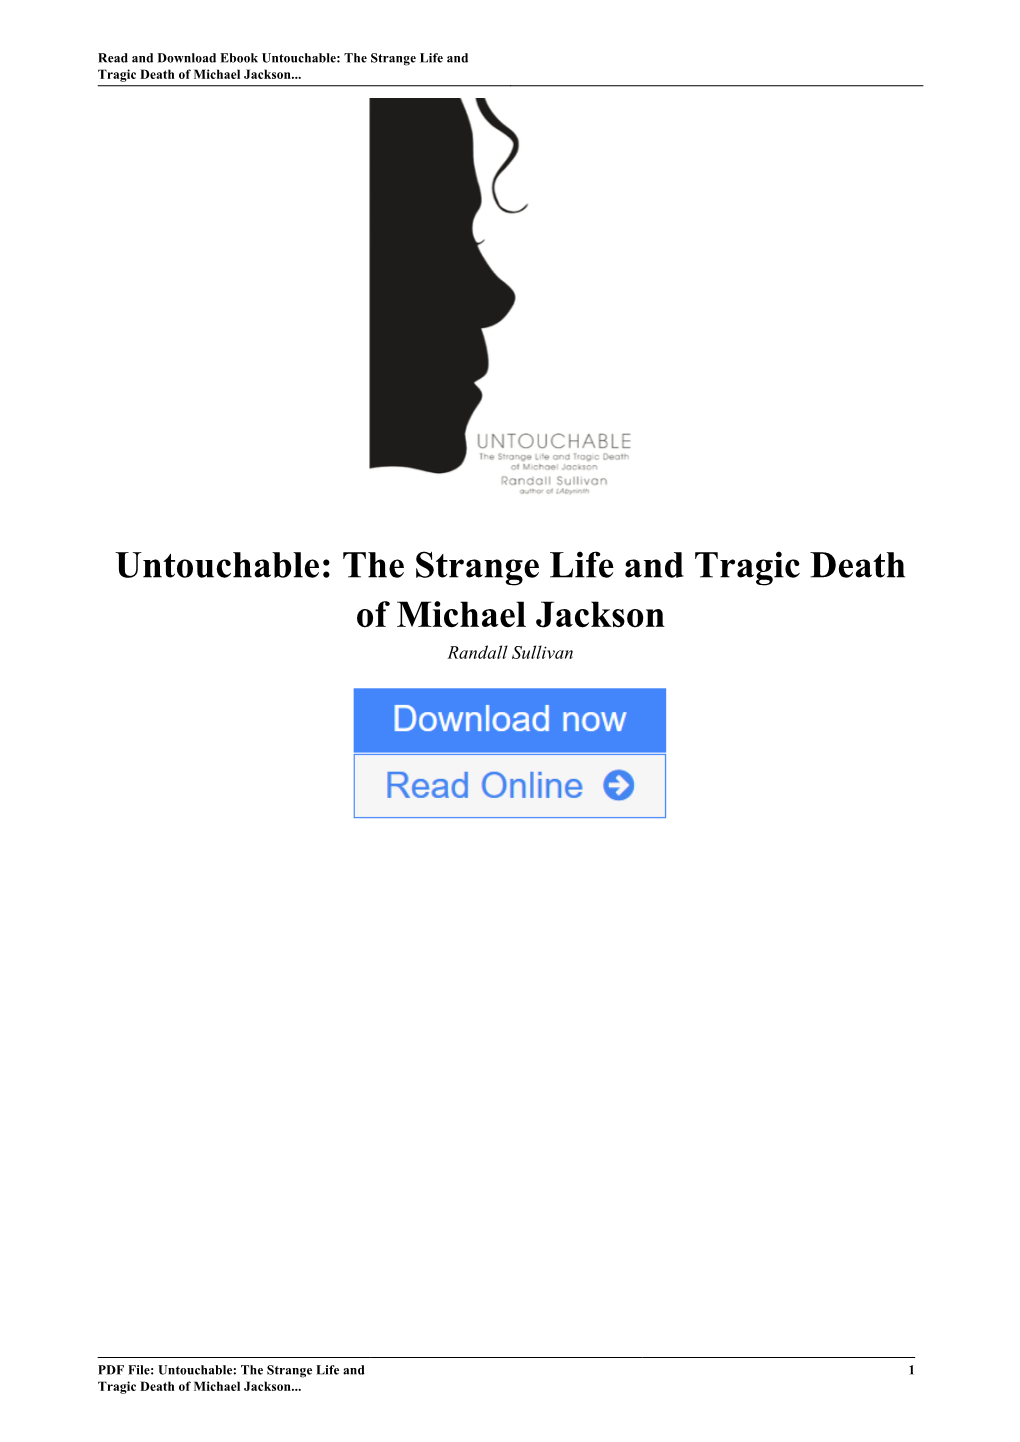 Untouchable: the Strange Life and Tragic Death of Michael Jackson By